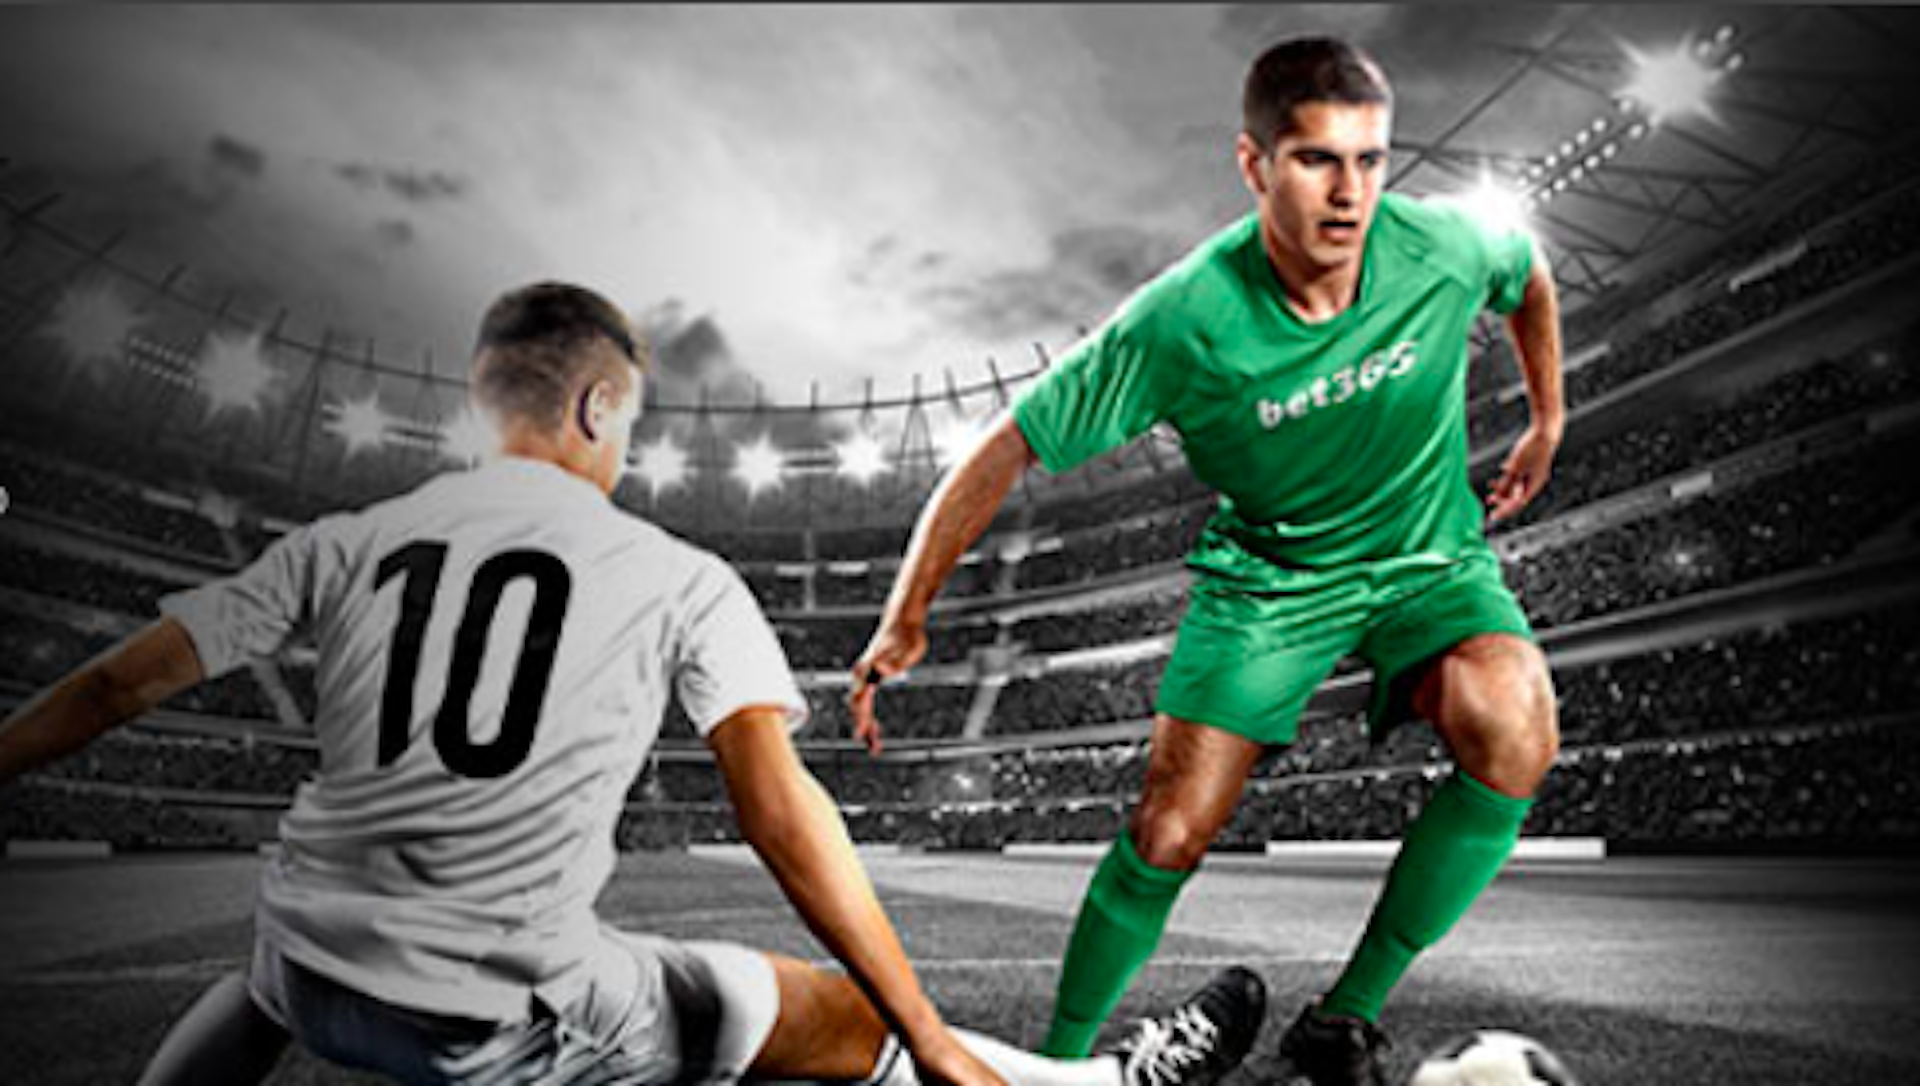 Bet365 Open Account Offer: Bet £10 Get £30 in Free Bets